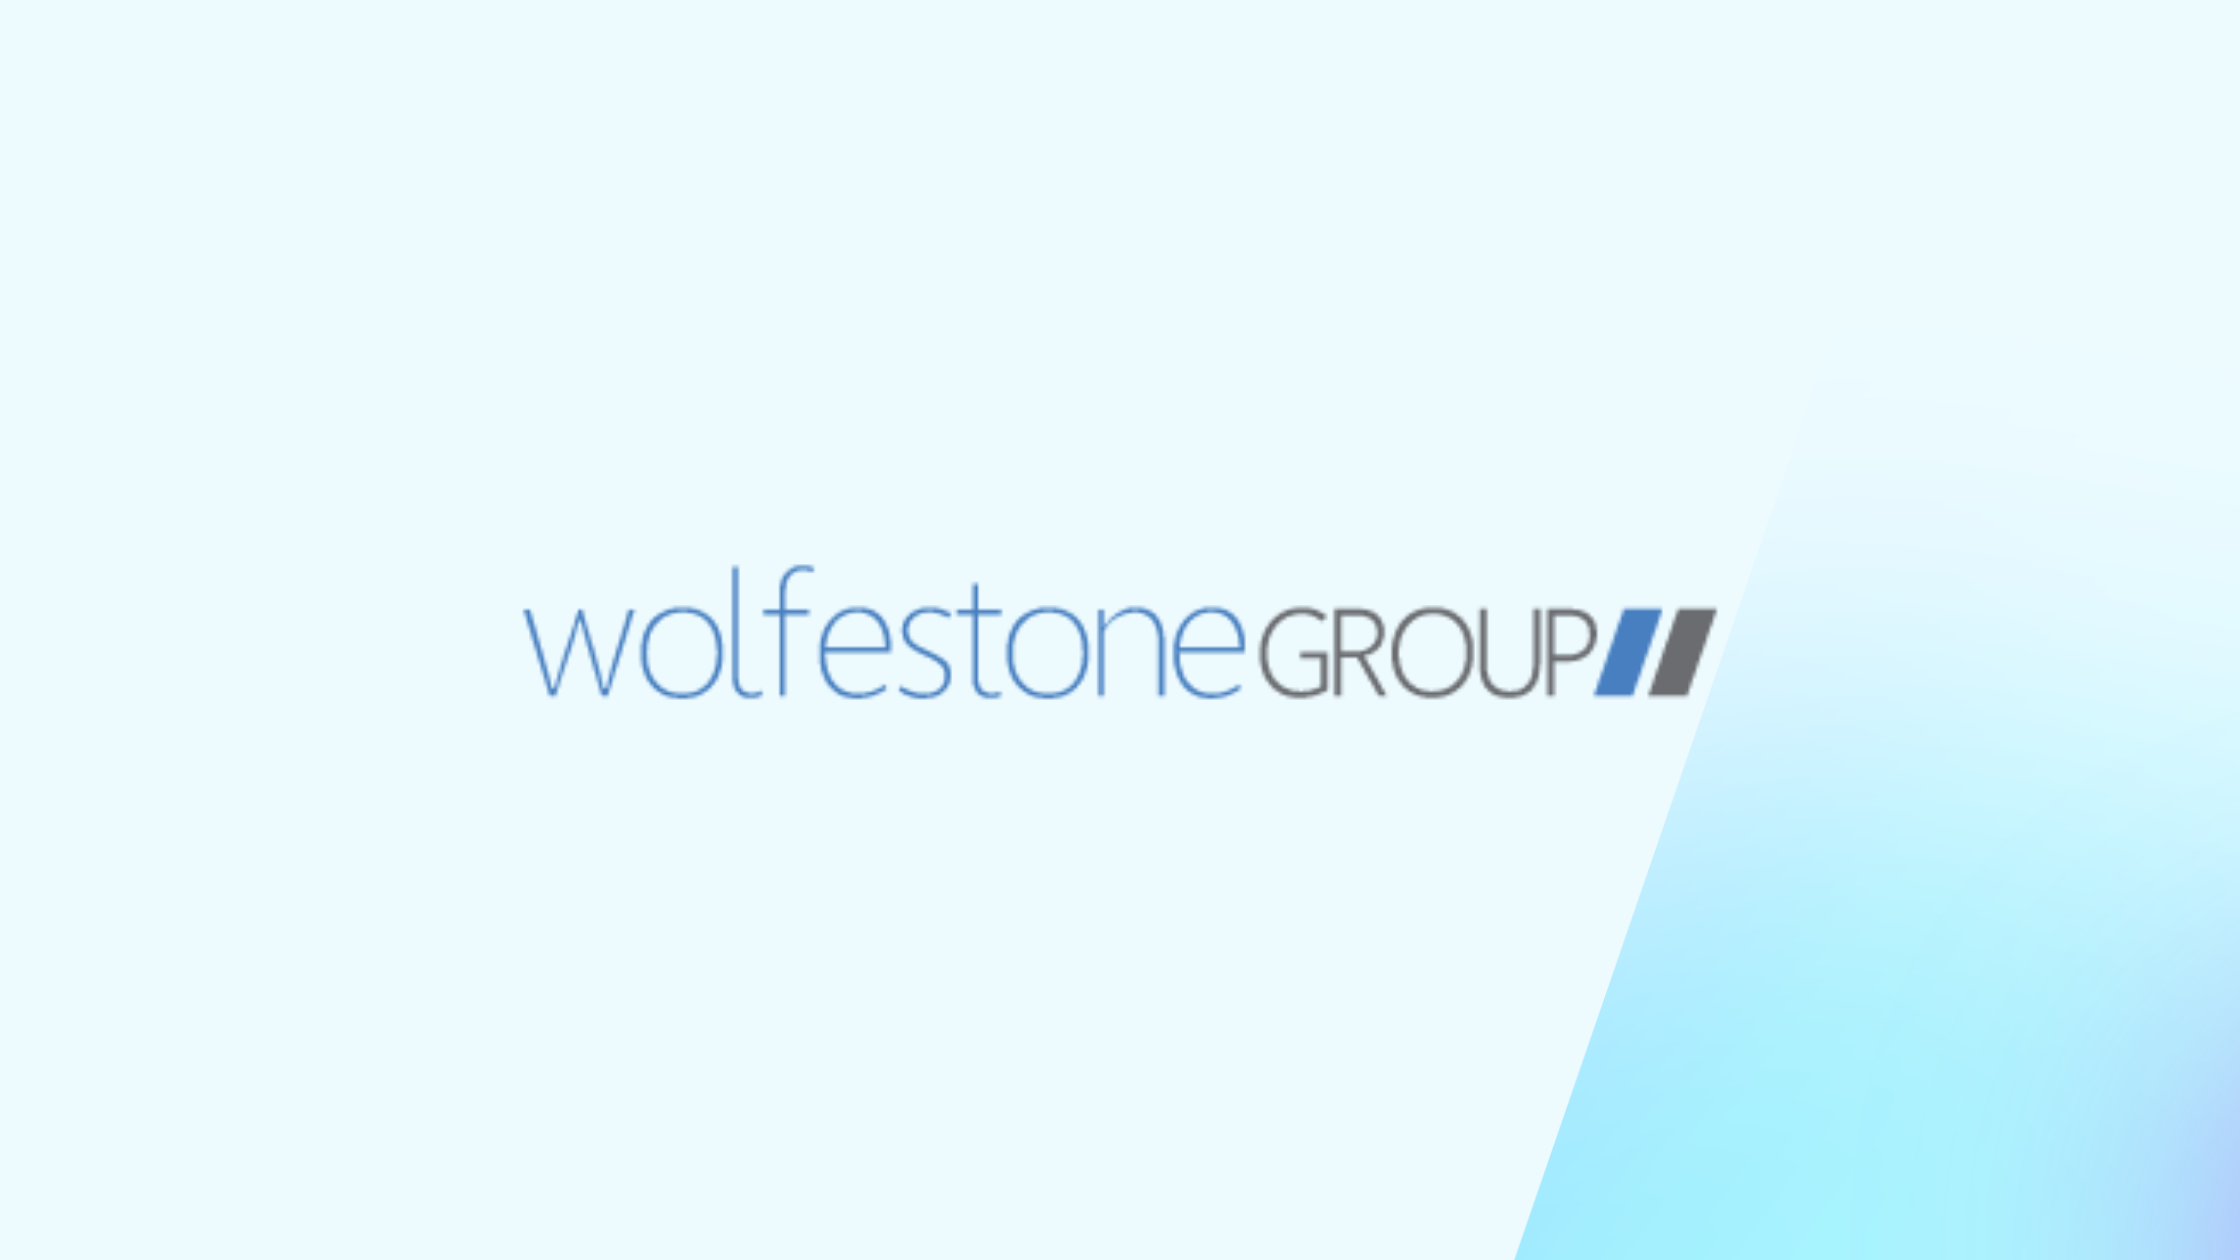 Wolfestone Group achieves ISO 27001:2013 certification, demonstrating its commitment to information security.